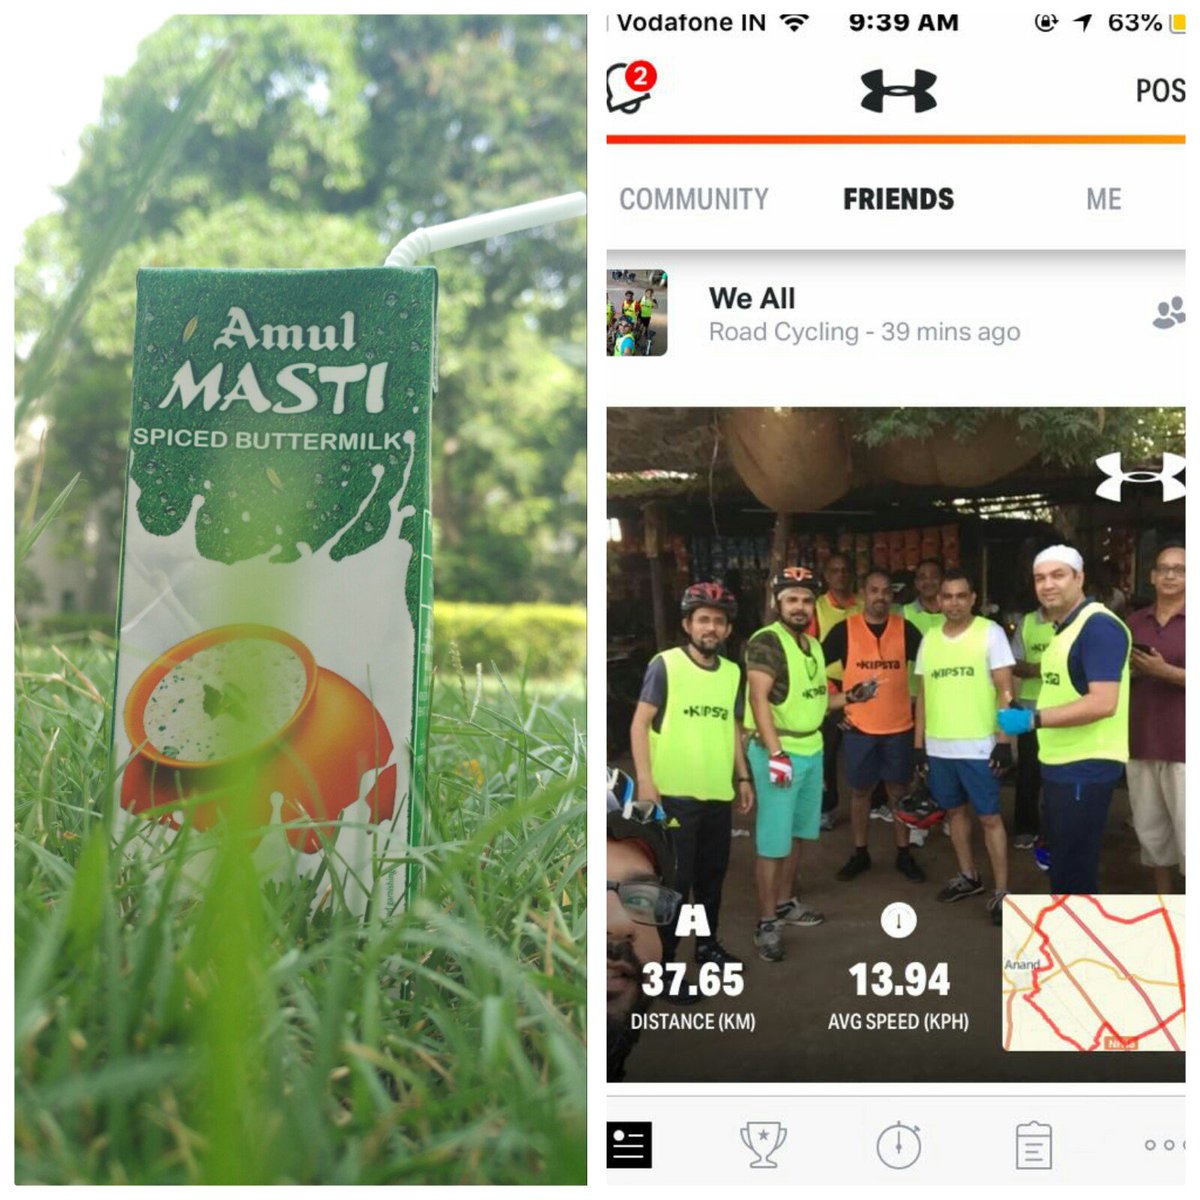 Which other can be #natural #thirst quencher than #amul #masti #buttermilk after 38km of #cycling in this heat ?? #photography #burnfat not #fuel #MorningDrive #trekking #countryside #health #passion #SundayMotivation #nature #groupactivity #tired